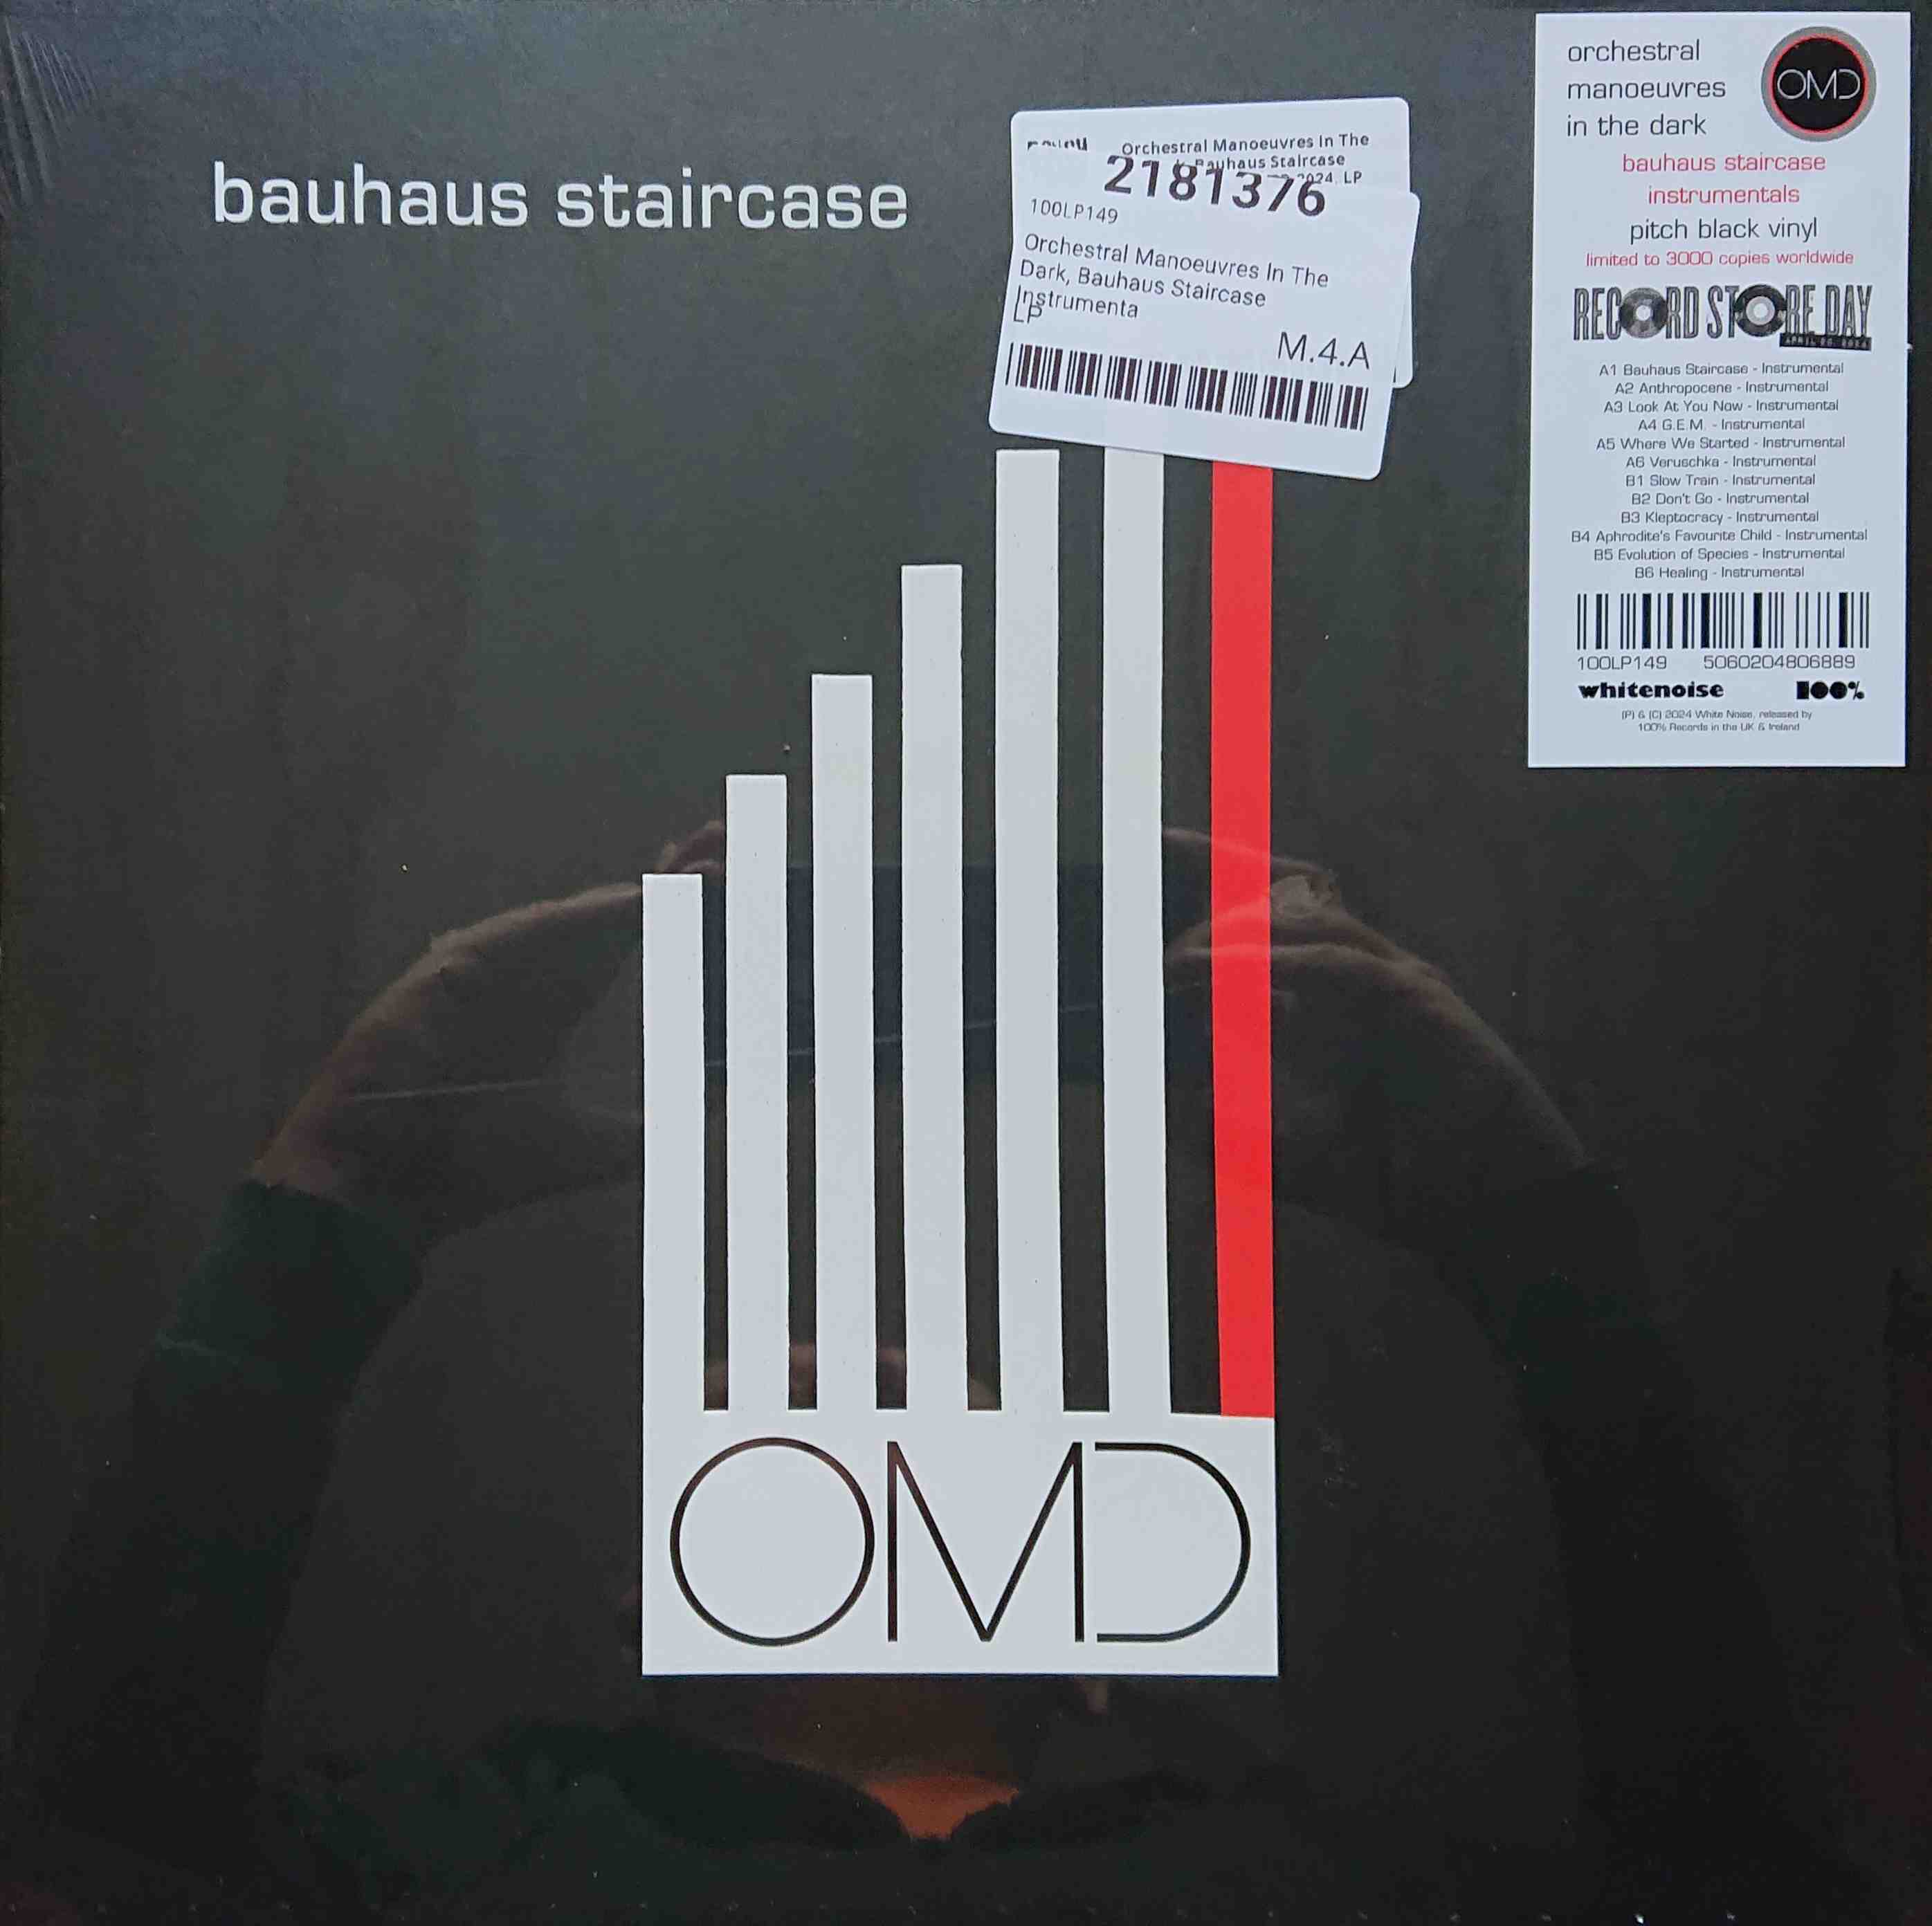 Picture of Bauhaus staircase by artist Orchestral Manoeuvres in the Dark (OMD) 